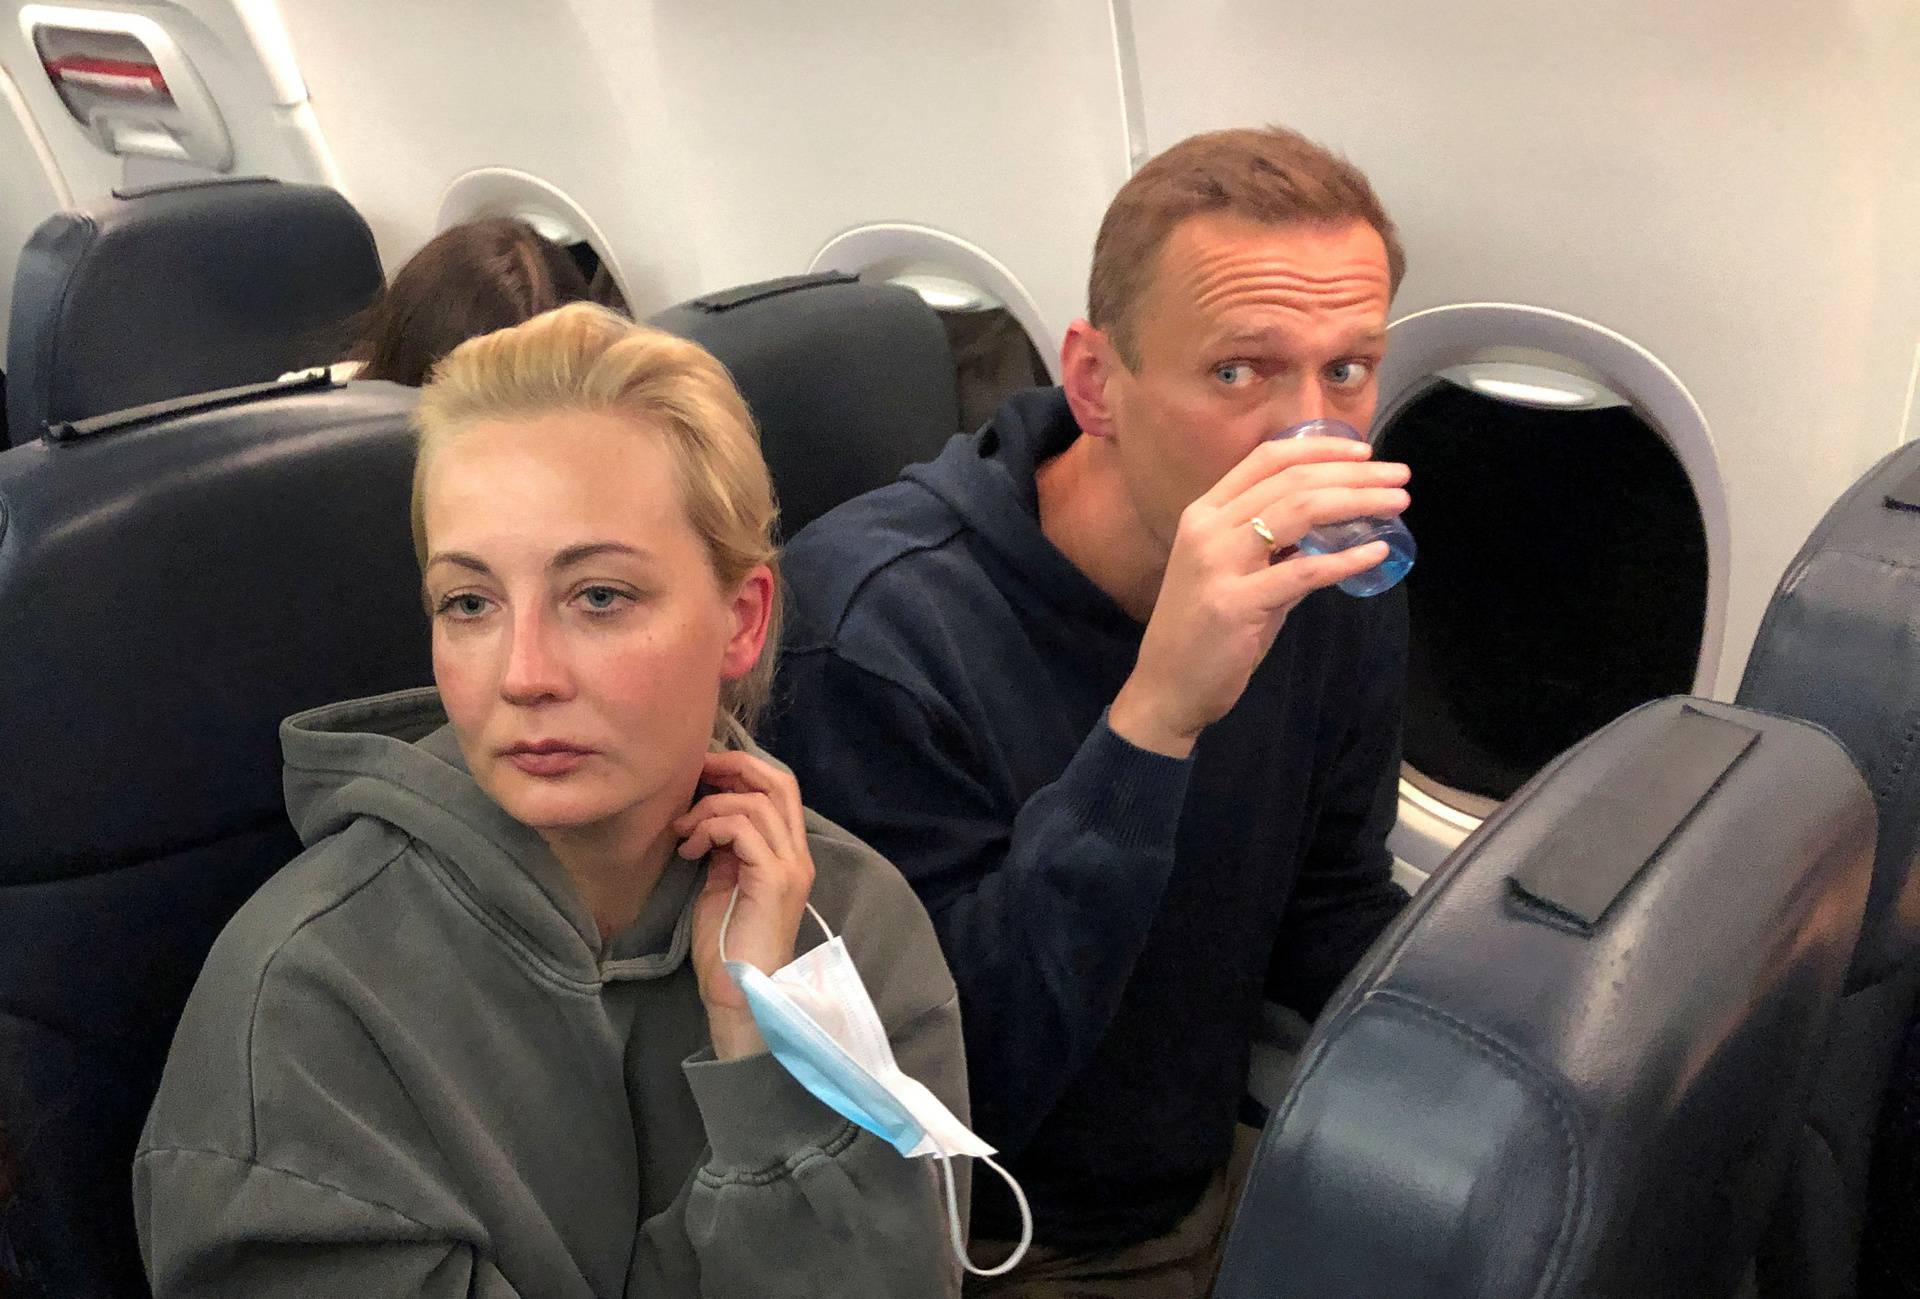 FILE PHOTO: Russian opposition leader Alexei Navalny and his wife Yulia Navalnaya are seen on board a plane during a flight from Berlin to Moscow